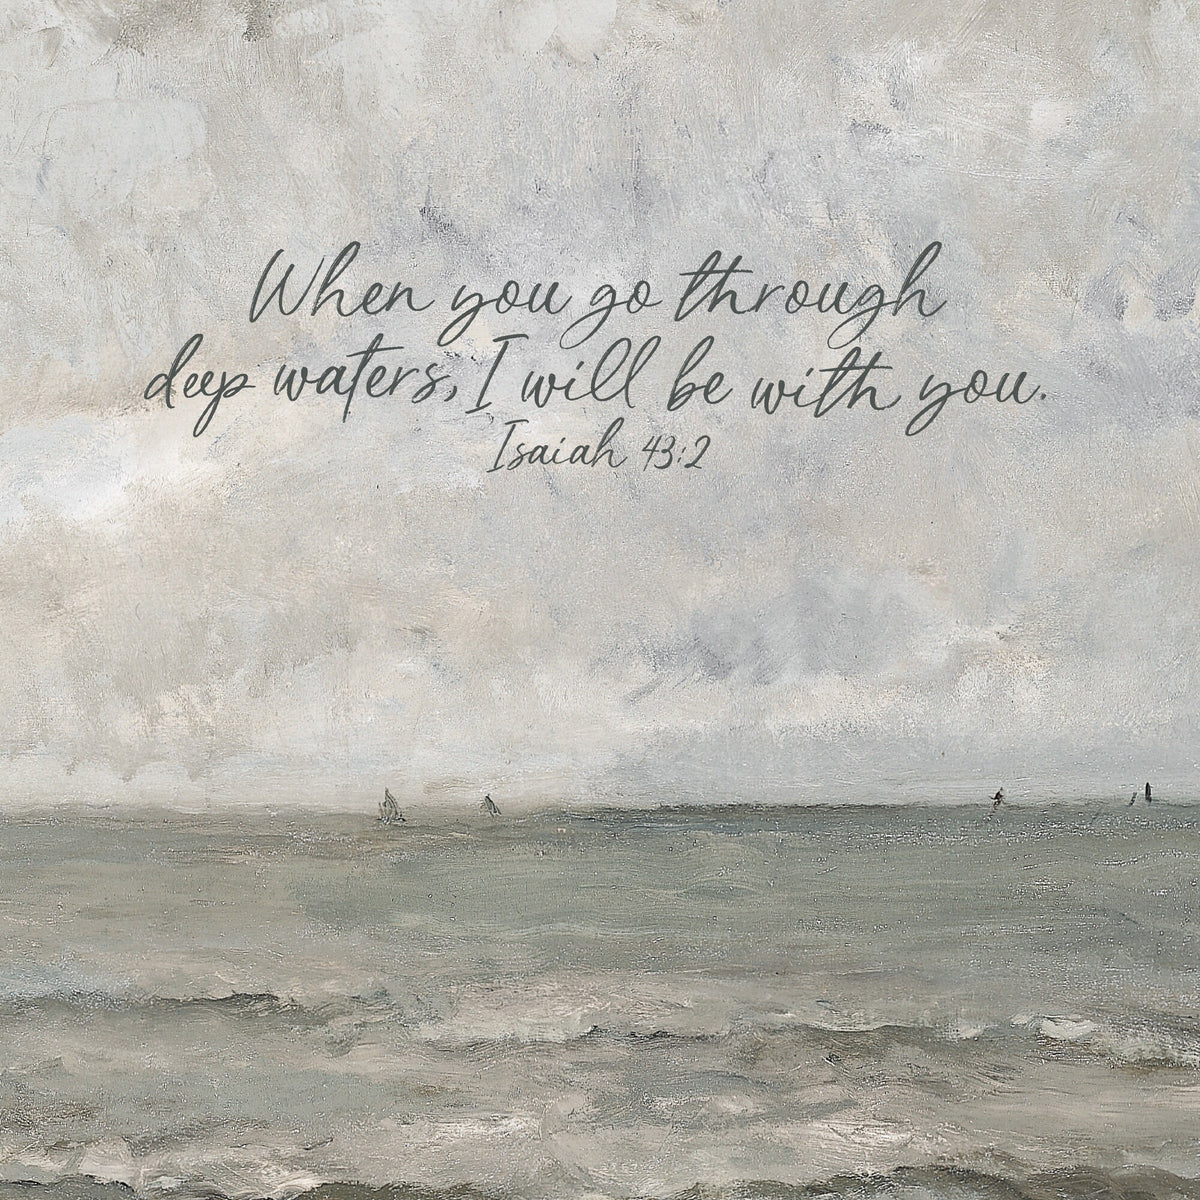 When You Go Through Deep Waters, I Will Be With You | Framed Wall Art | Vintage Ocean Painting | Isaiah 43:2 | Christian Home Decor | W118